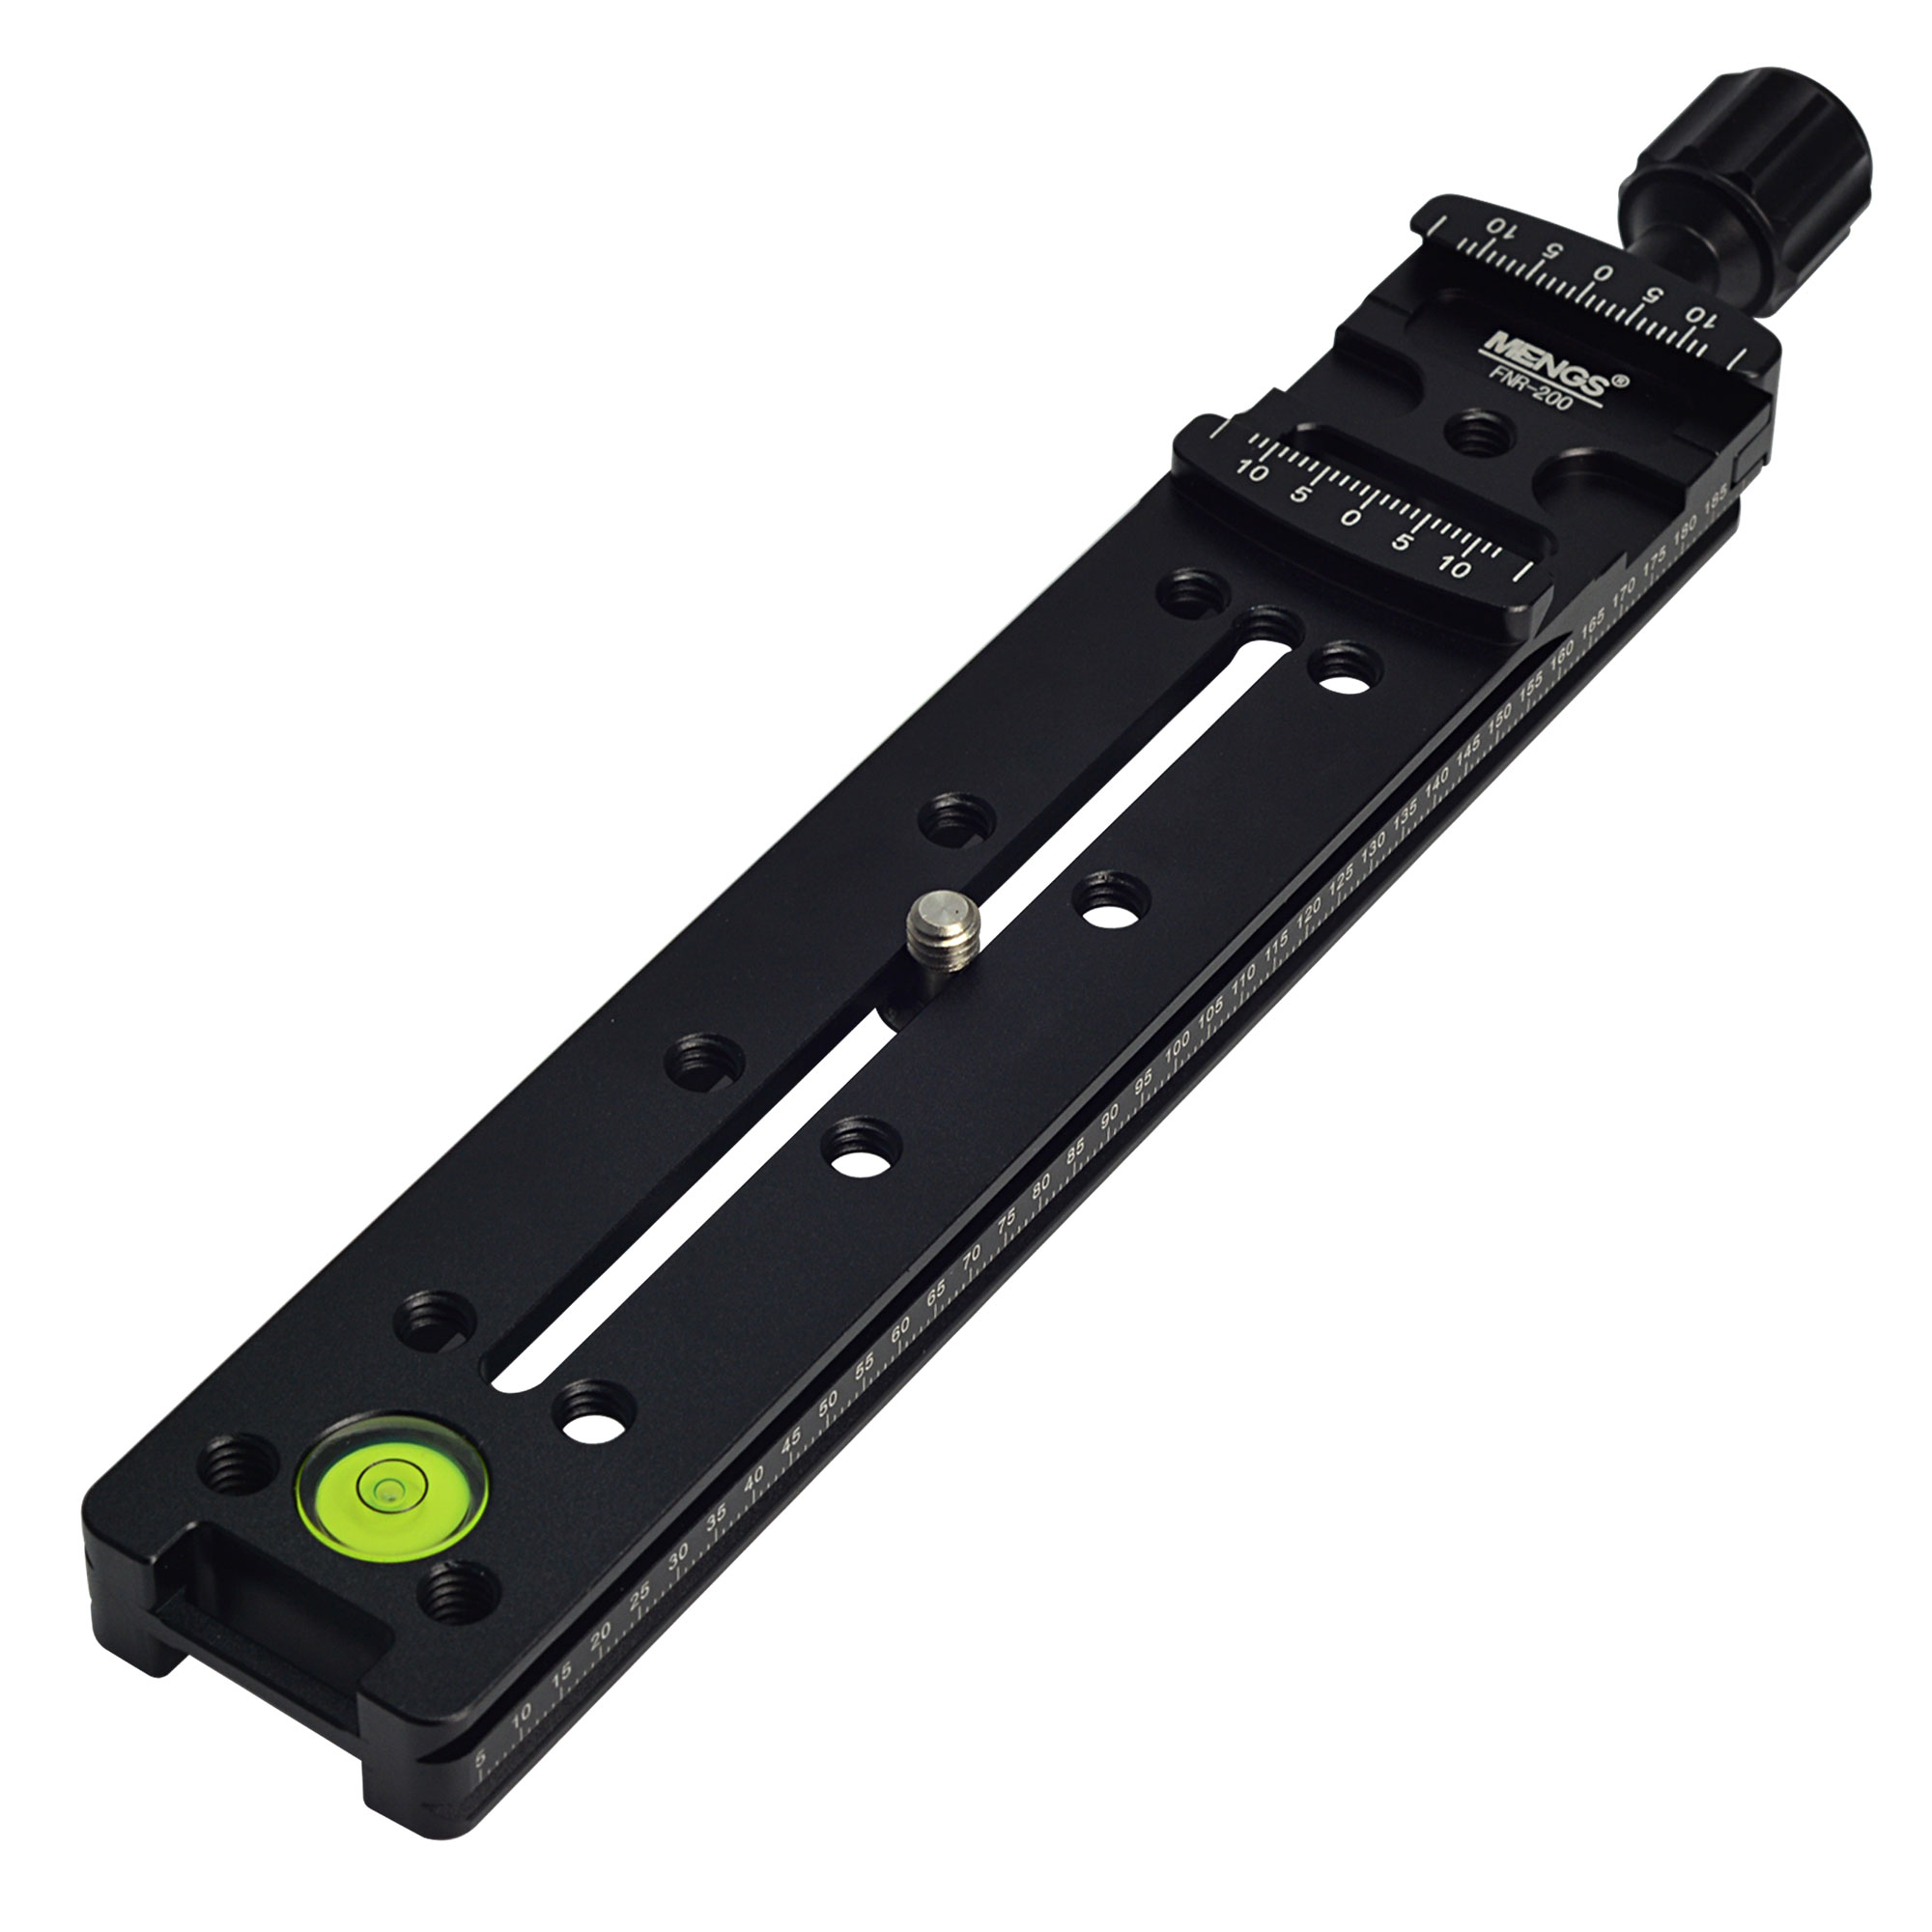 Quick Release Clamp with Aluminum Alloy Compatible with AS Standard Quick Release Plate MENGS DR-200 Rail Nodal Slide Plate 